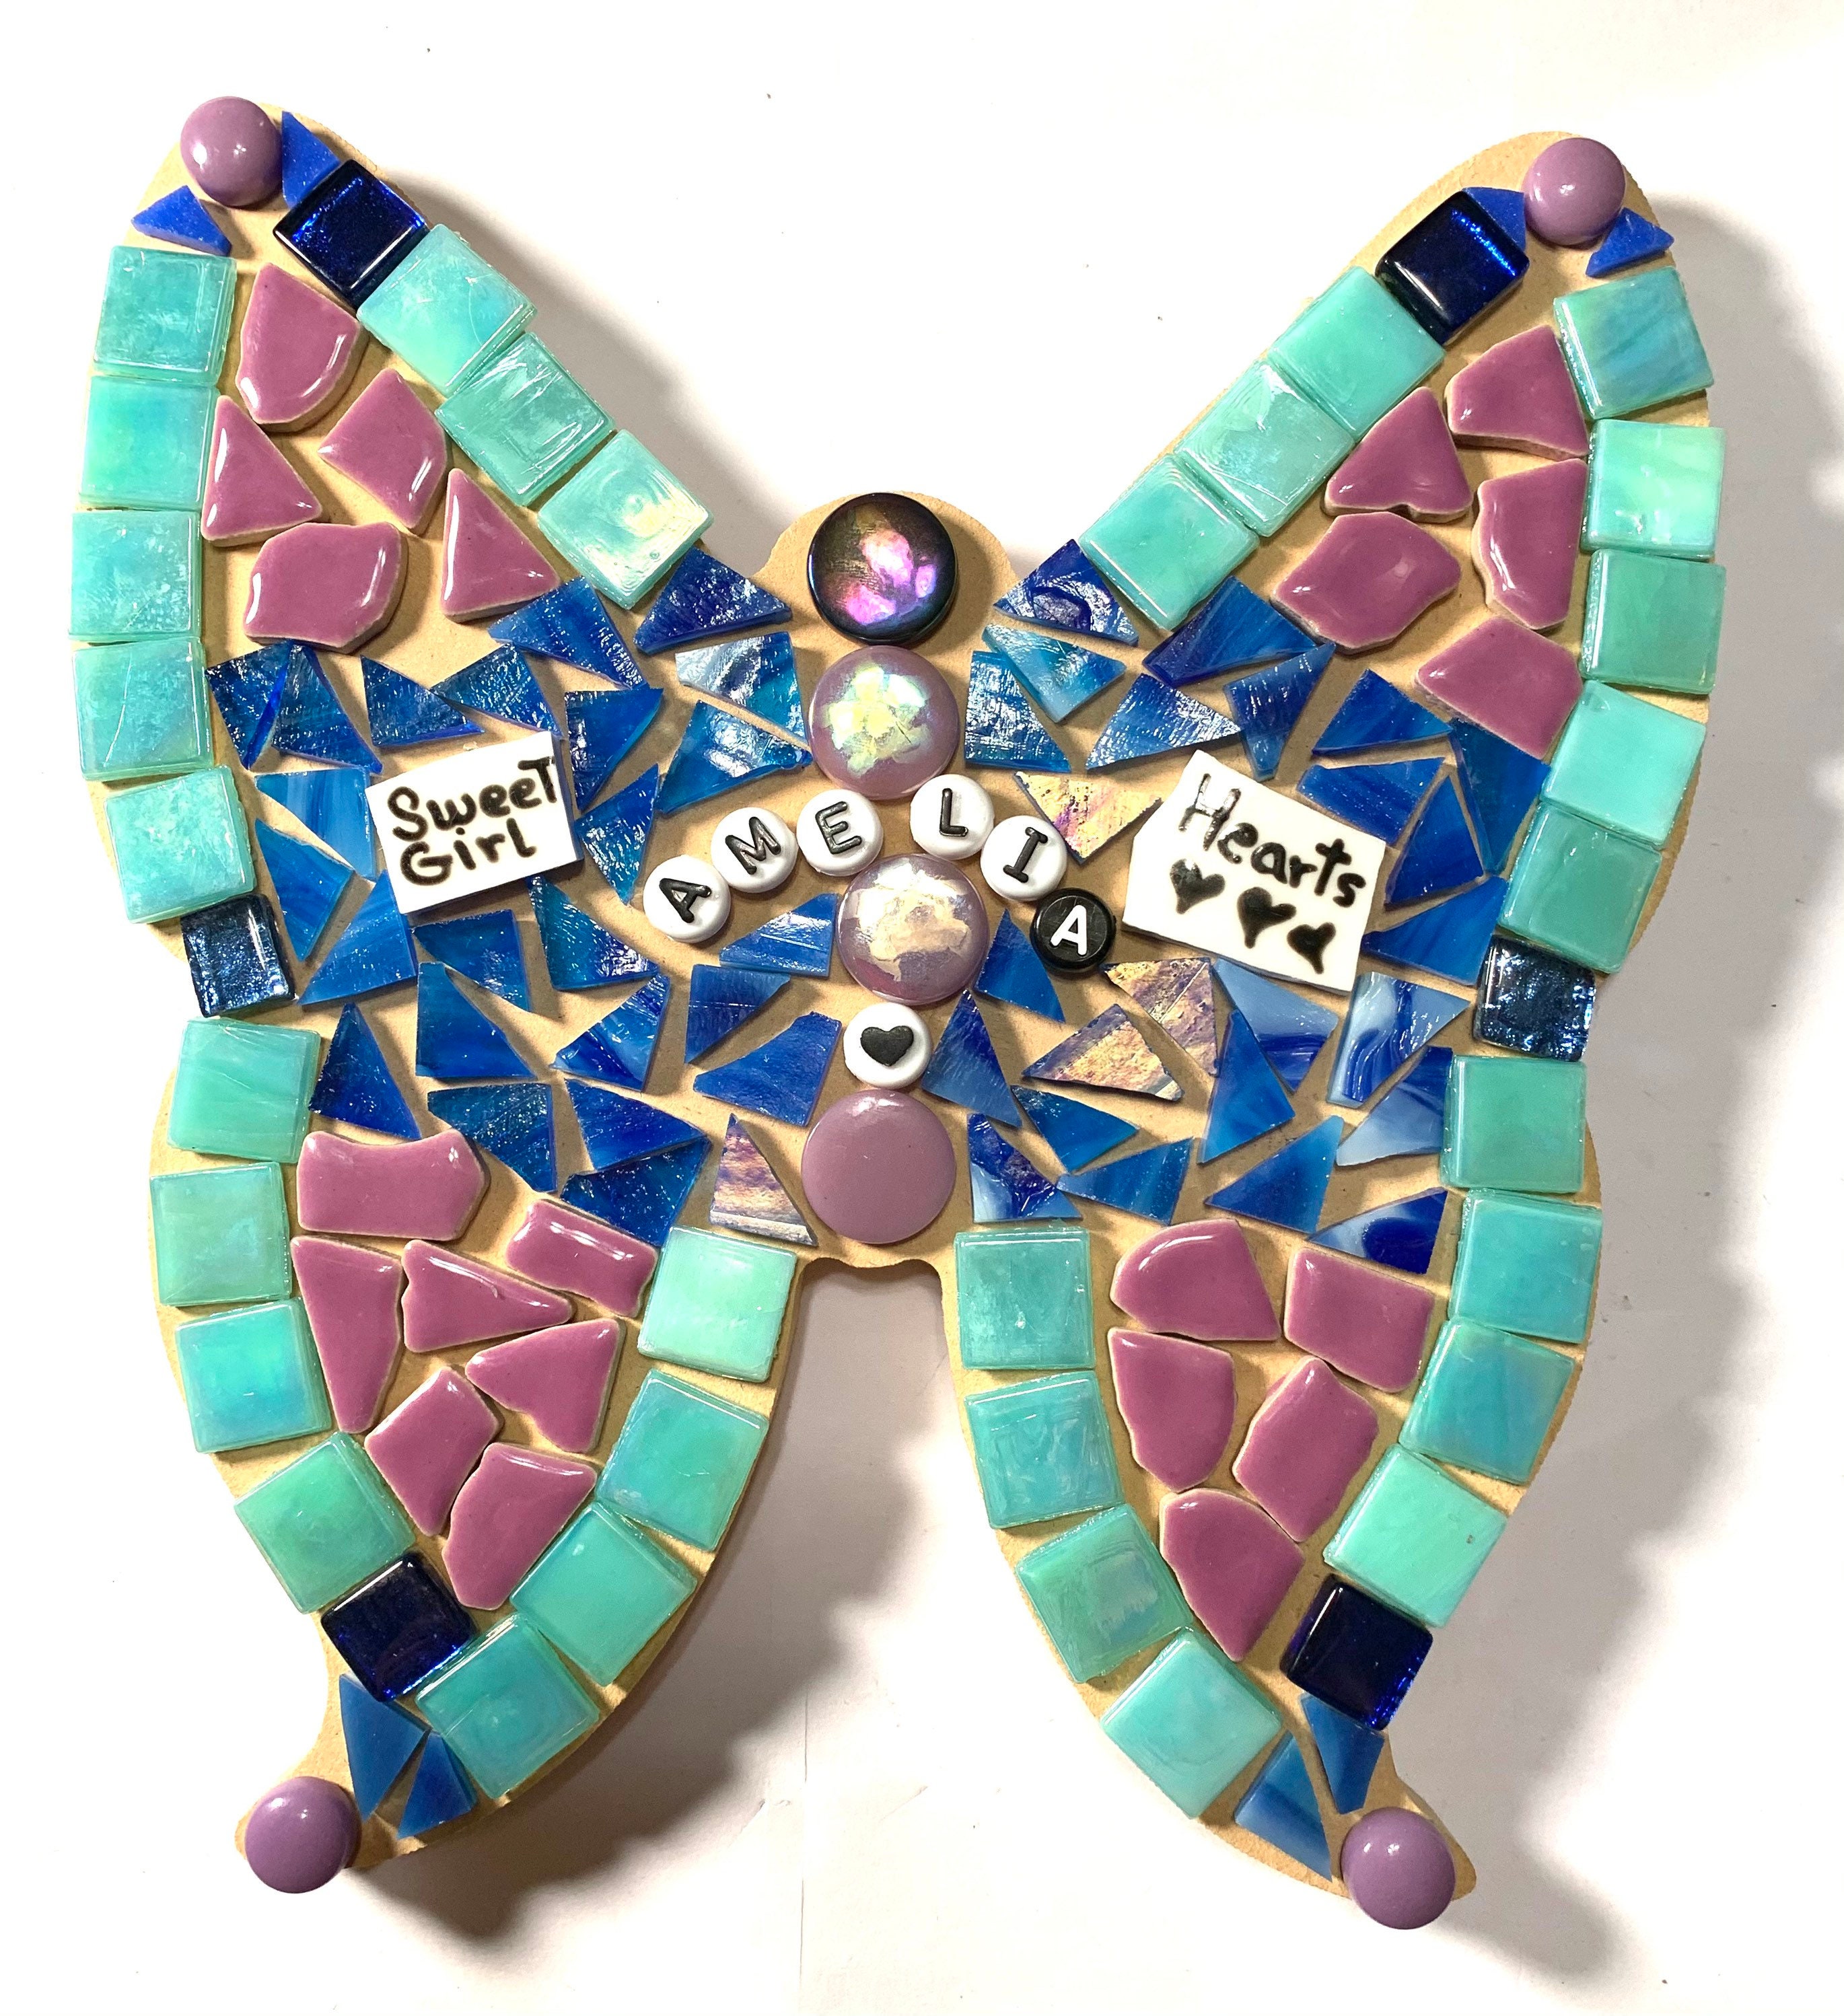 Mosaic Craft Kits for Kids /Adults/ Teens - Rainbow Butterfly, Learn To  Mosaic